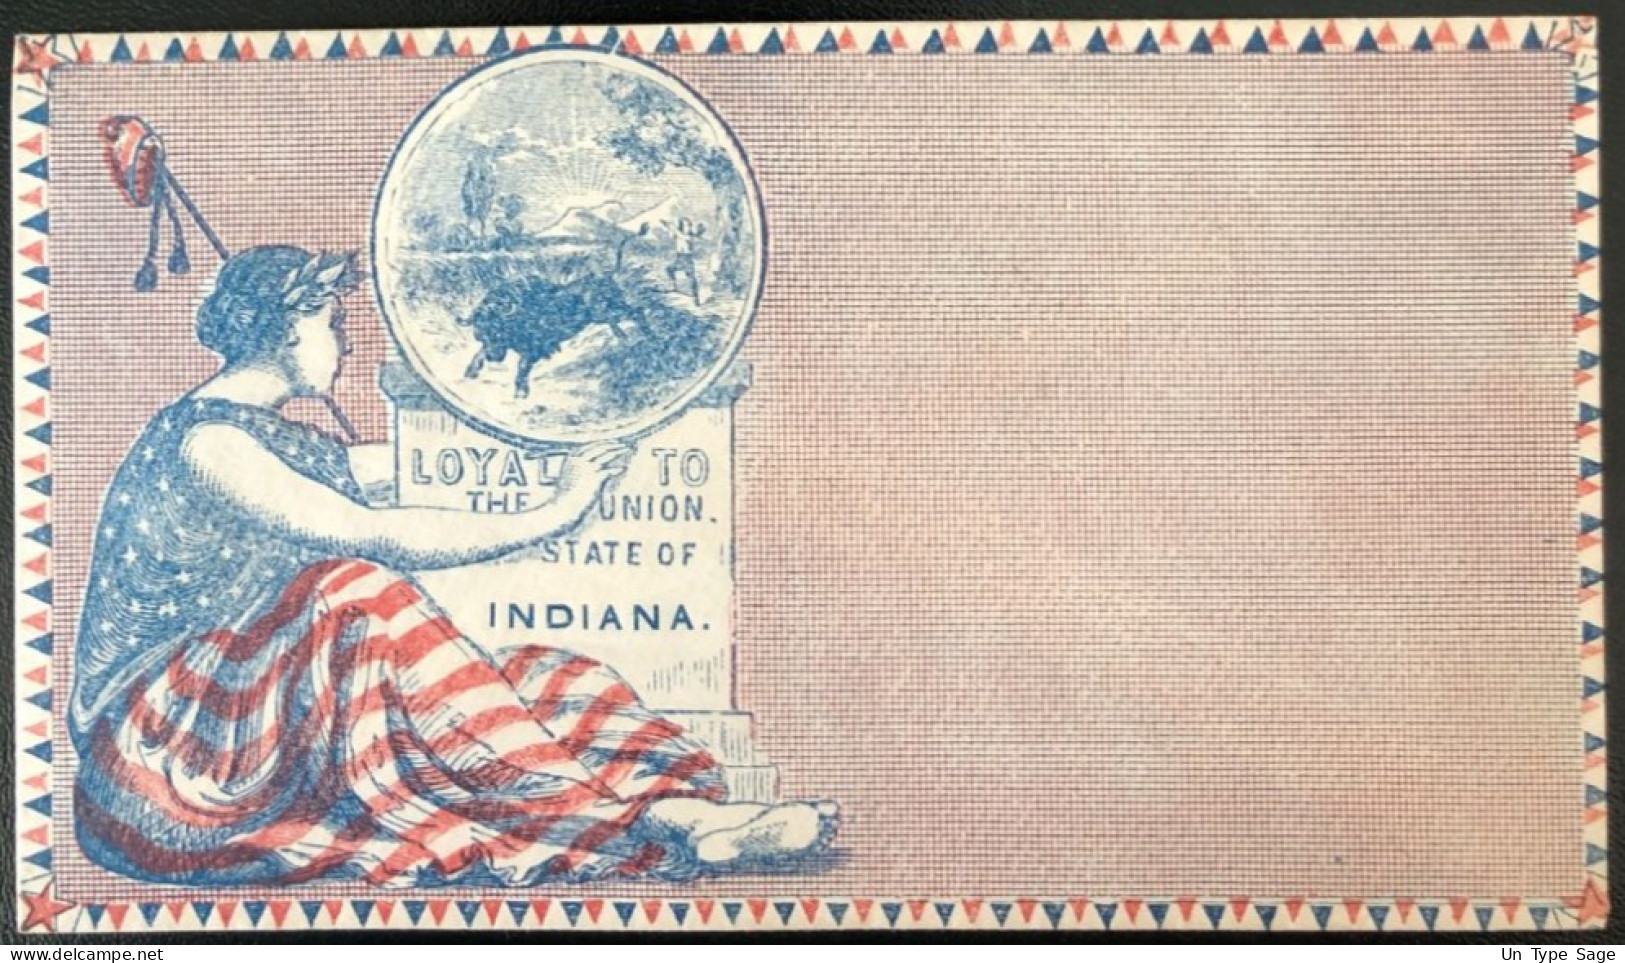 U.S.A, Civil War, Patriotic Cover - "Loyal To The Union. State Of INDIANA" - Unused - (C457) - Marcofilia